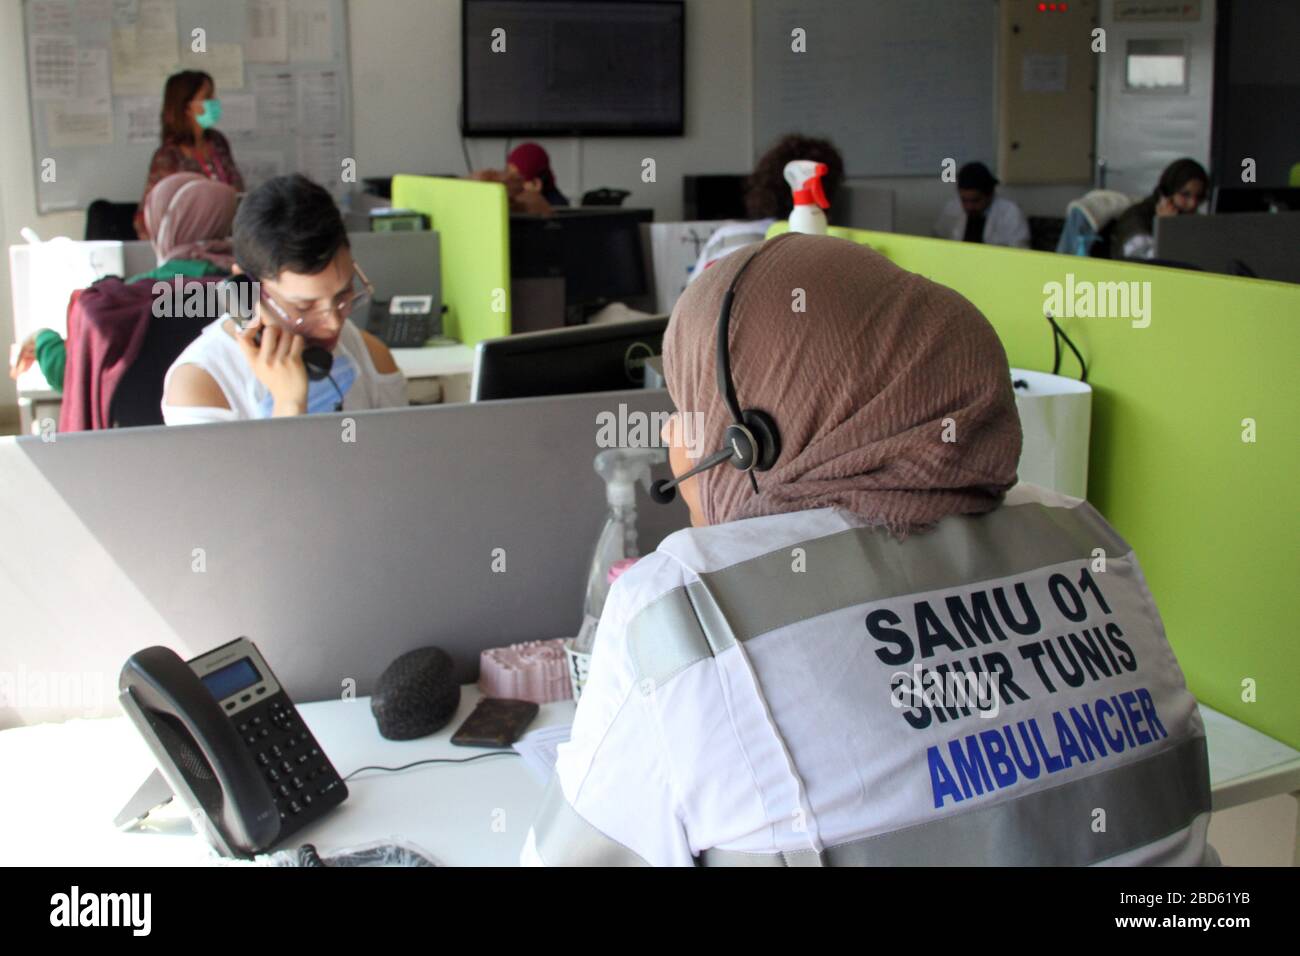 A medical assistant attending to COVID-19 disease-related calls during operations.SAMU Tunisia (Urgent Medical Aid Service), are busier than before attending to the increasing COVID-19 patients in the capital Tunis. Stock Photo